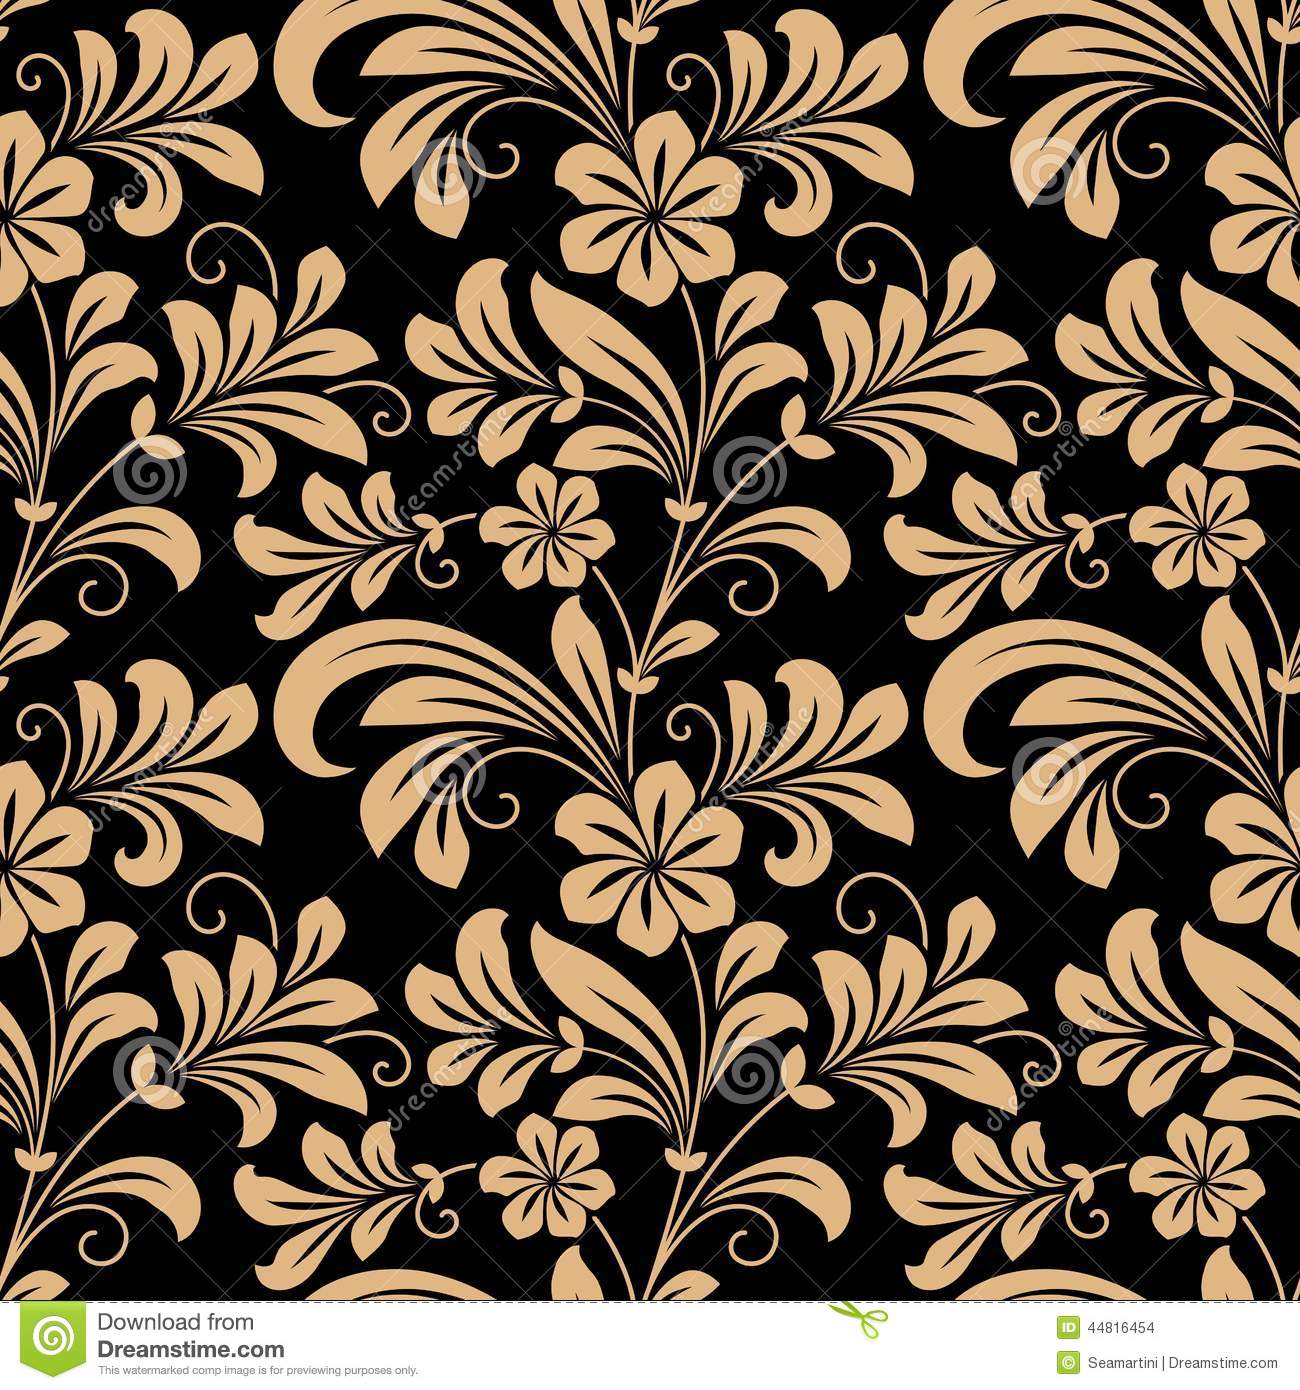 Floral Seamless Pattern With Gold Flowers - Floral Wallpaper Gold And Black  - 1300x1390 Wallpaper 